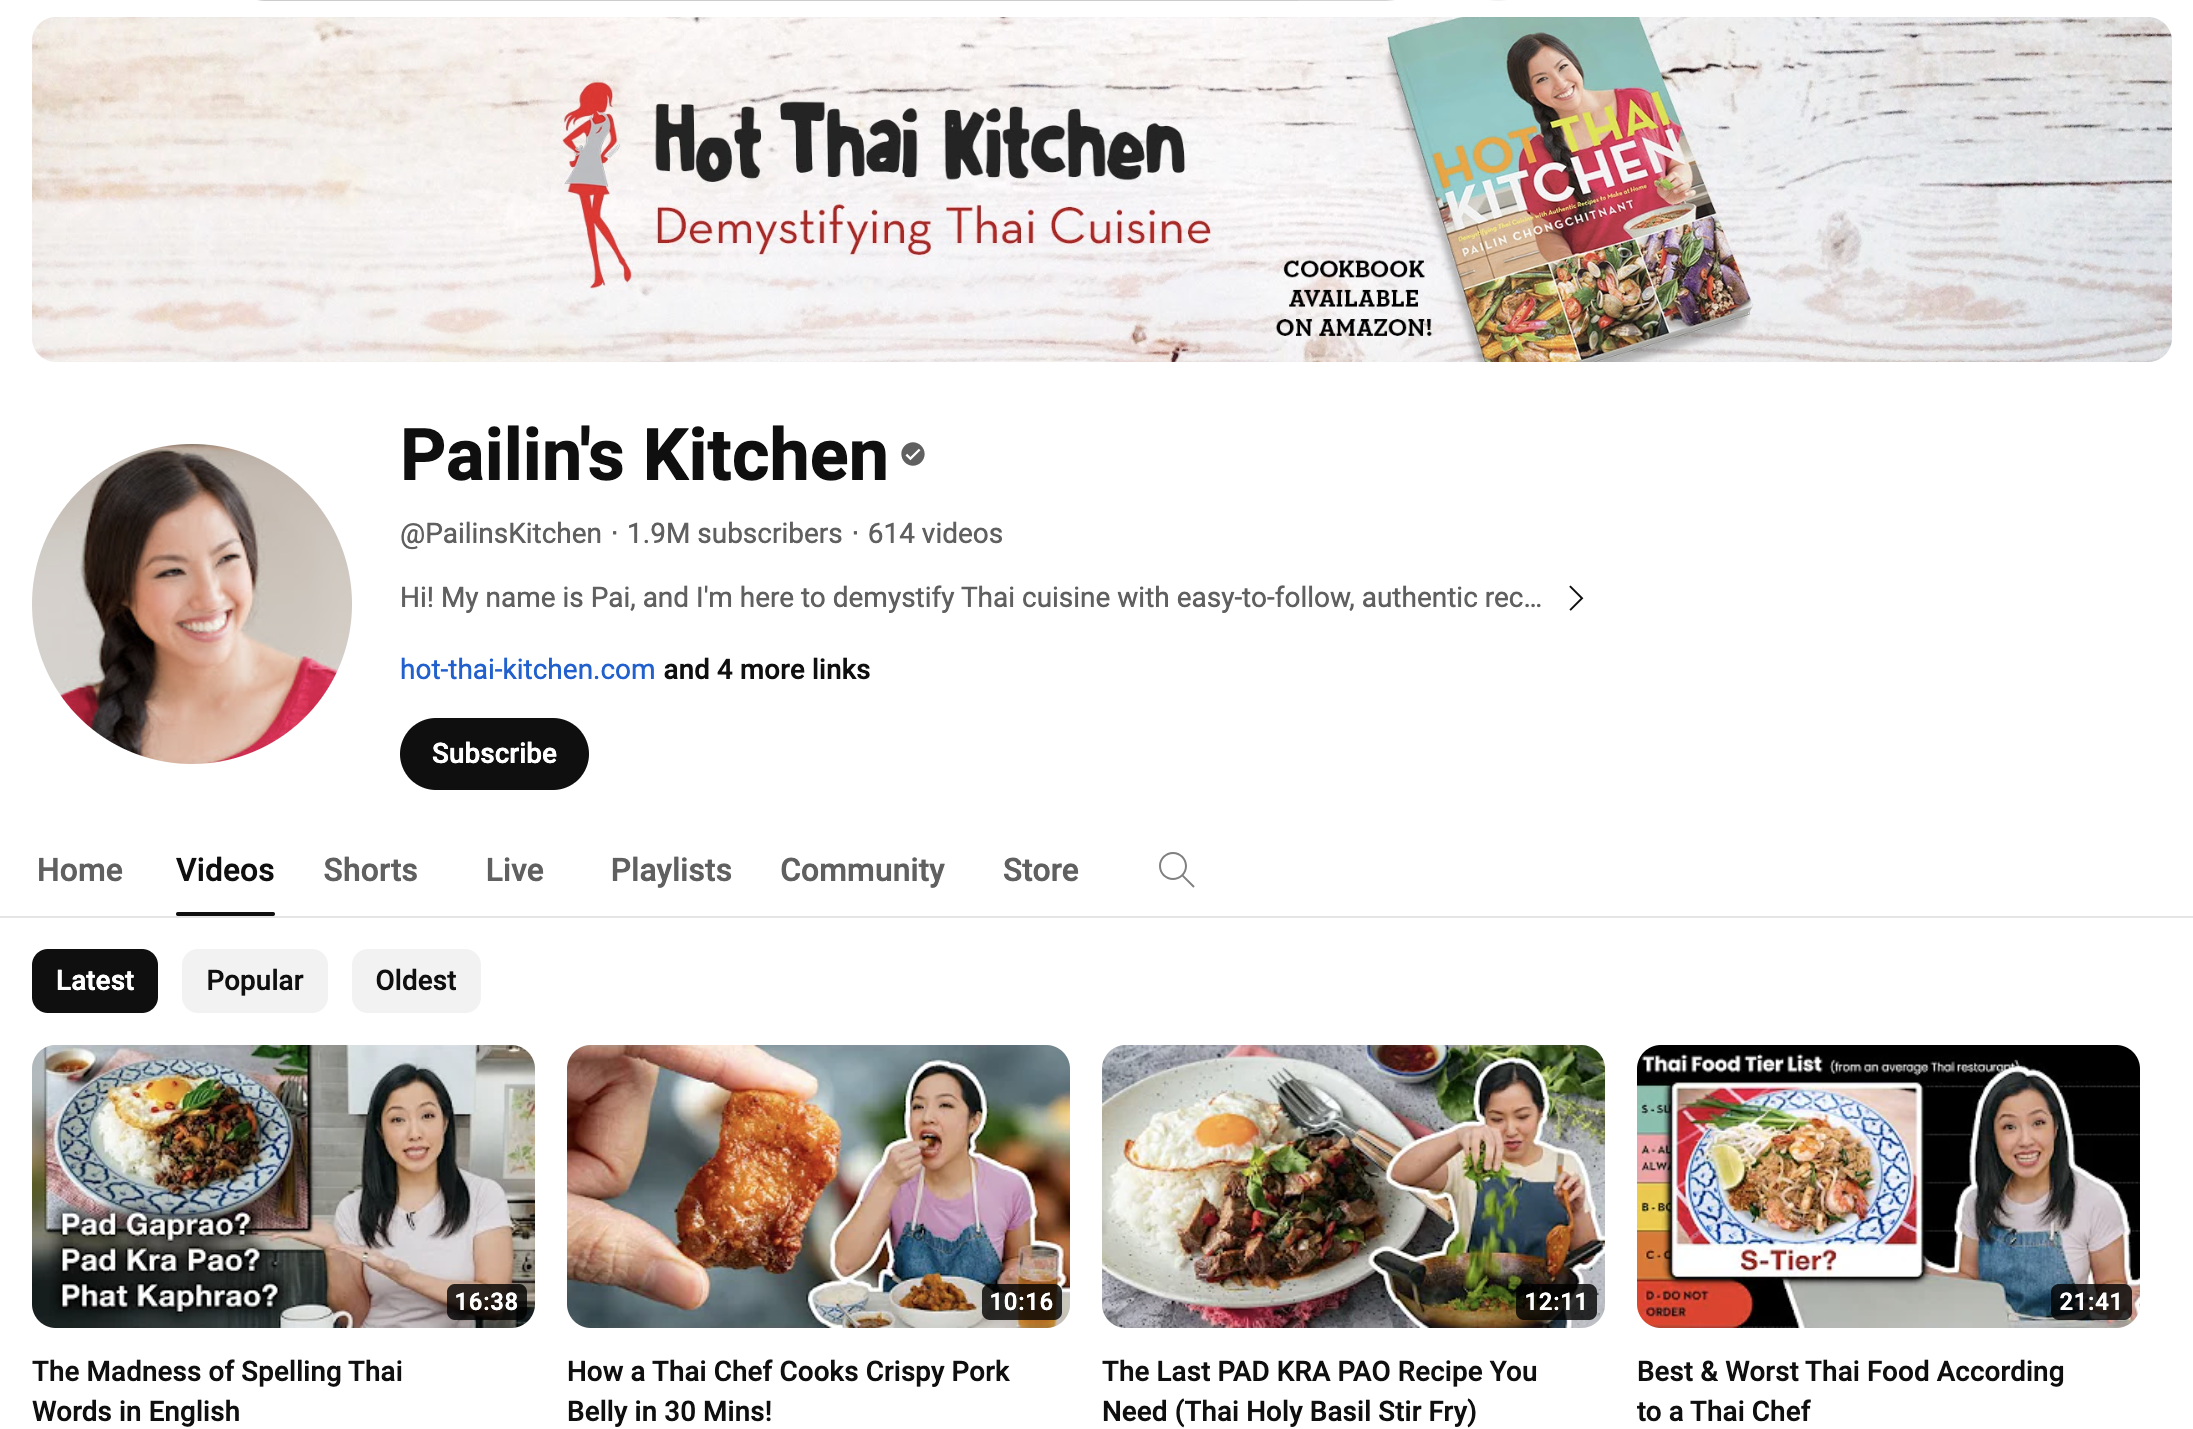 Screenshot of video page for YouTube cooking channel, Pailin's Kitchen